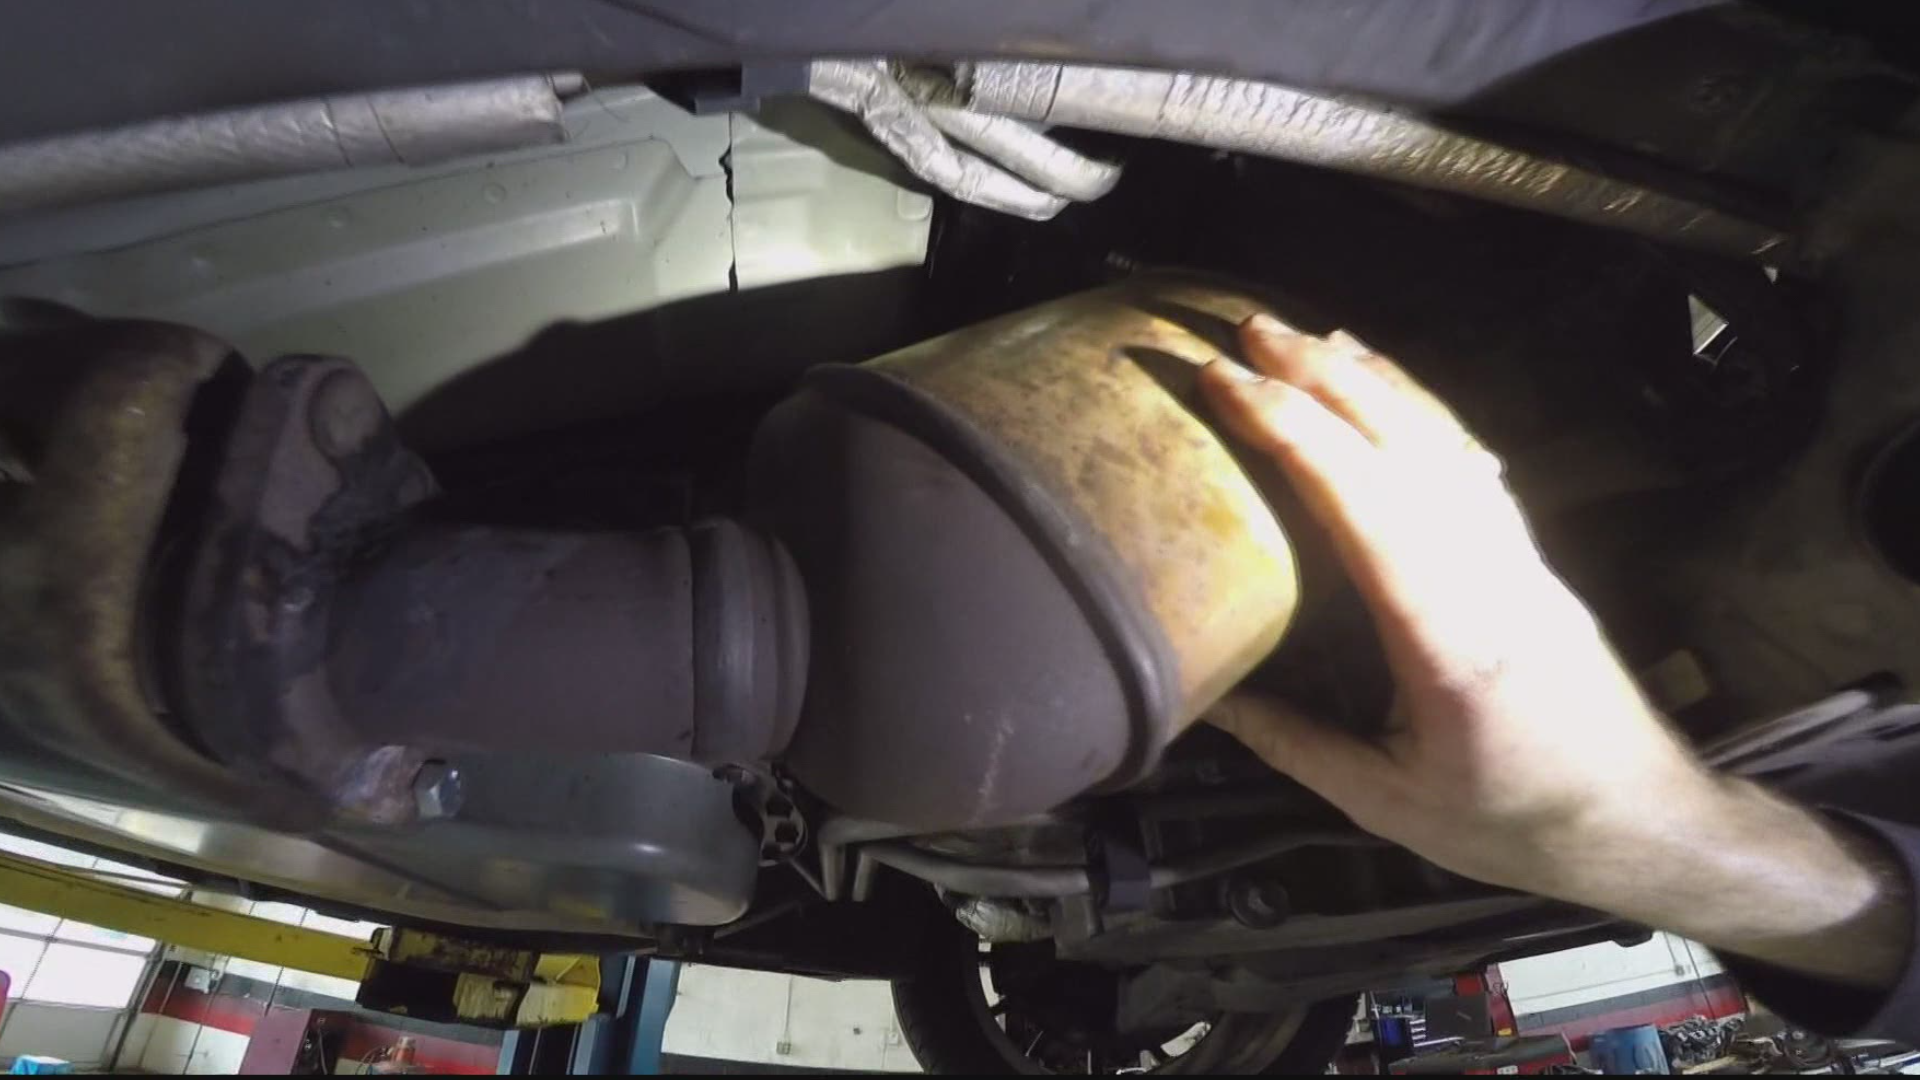 Indiana is considering tougher penalties for catalytic converter thefts.